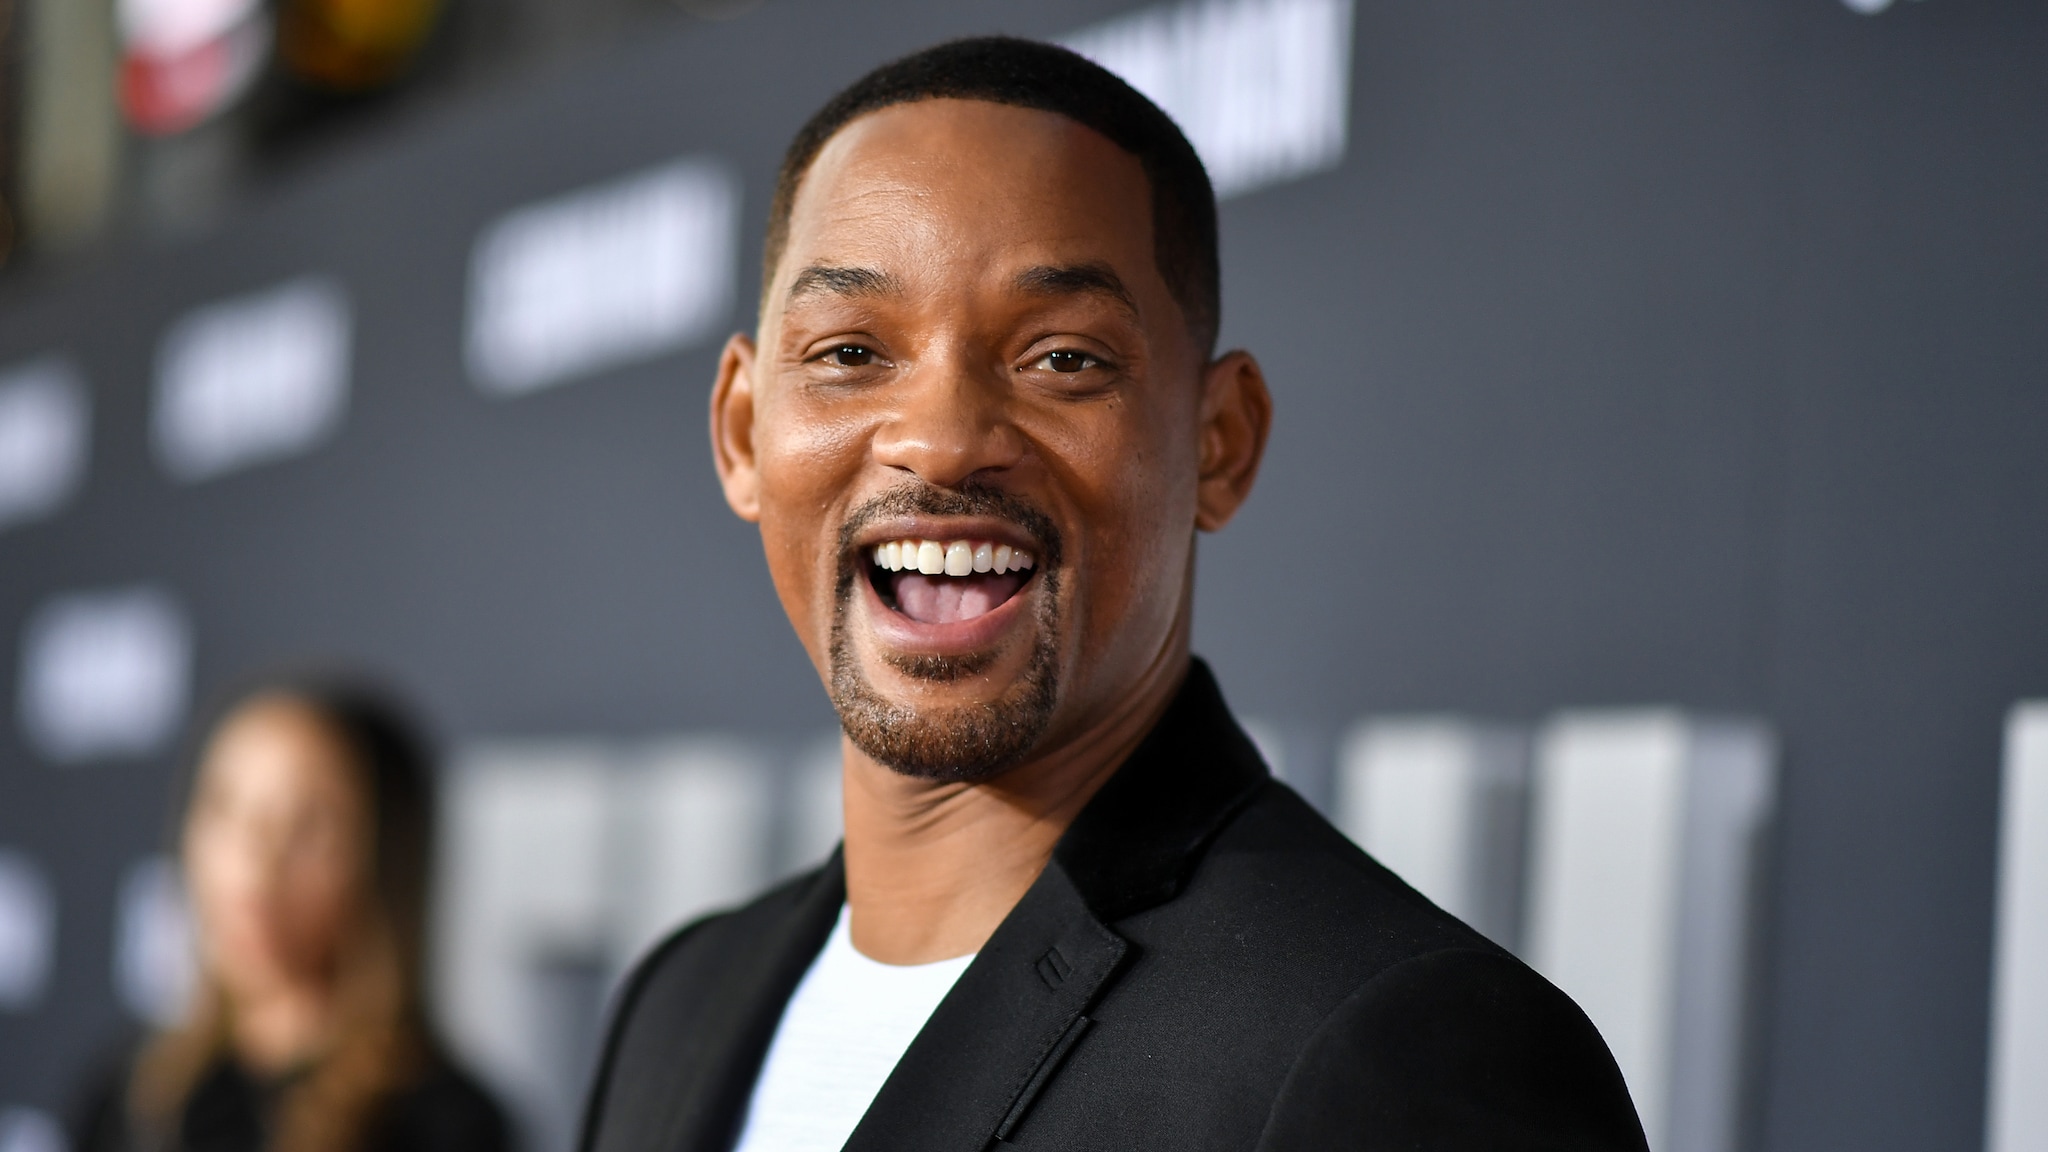 biography of will smith actor